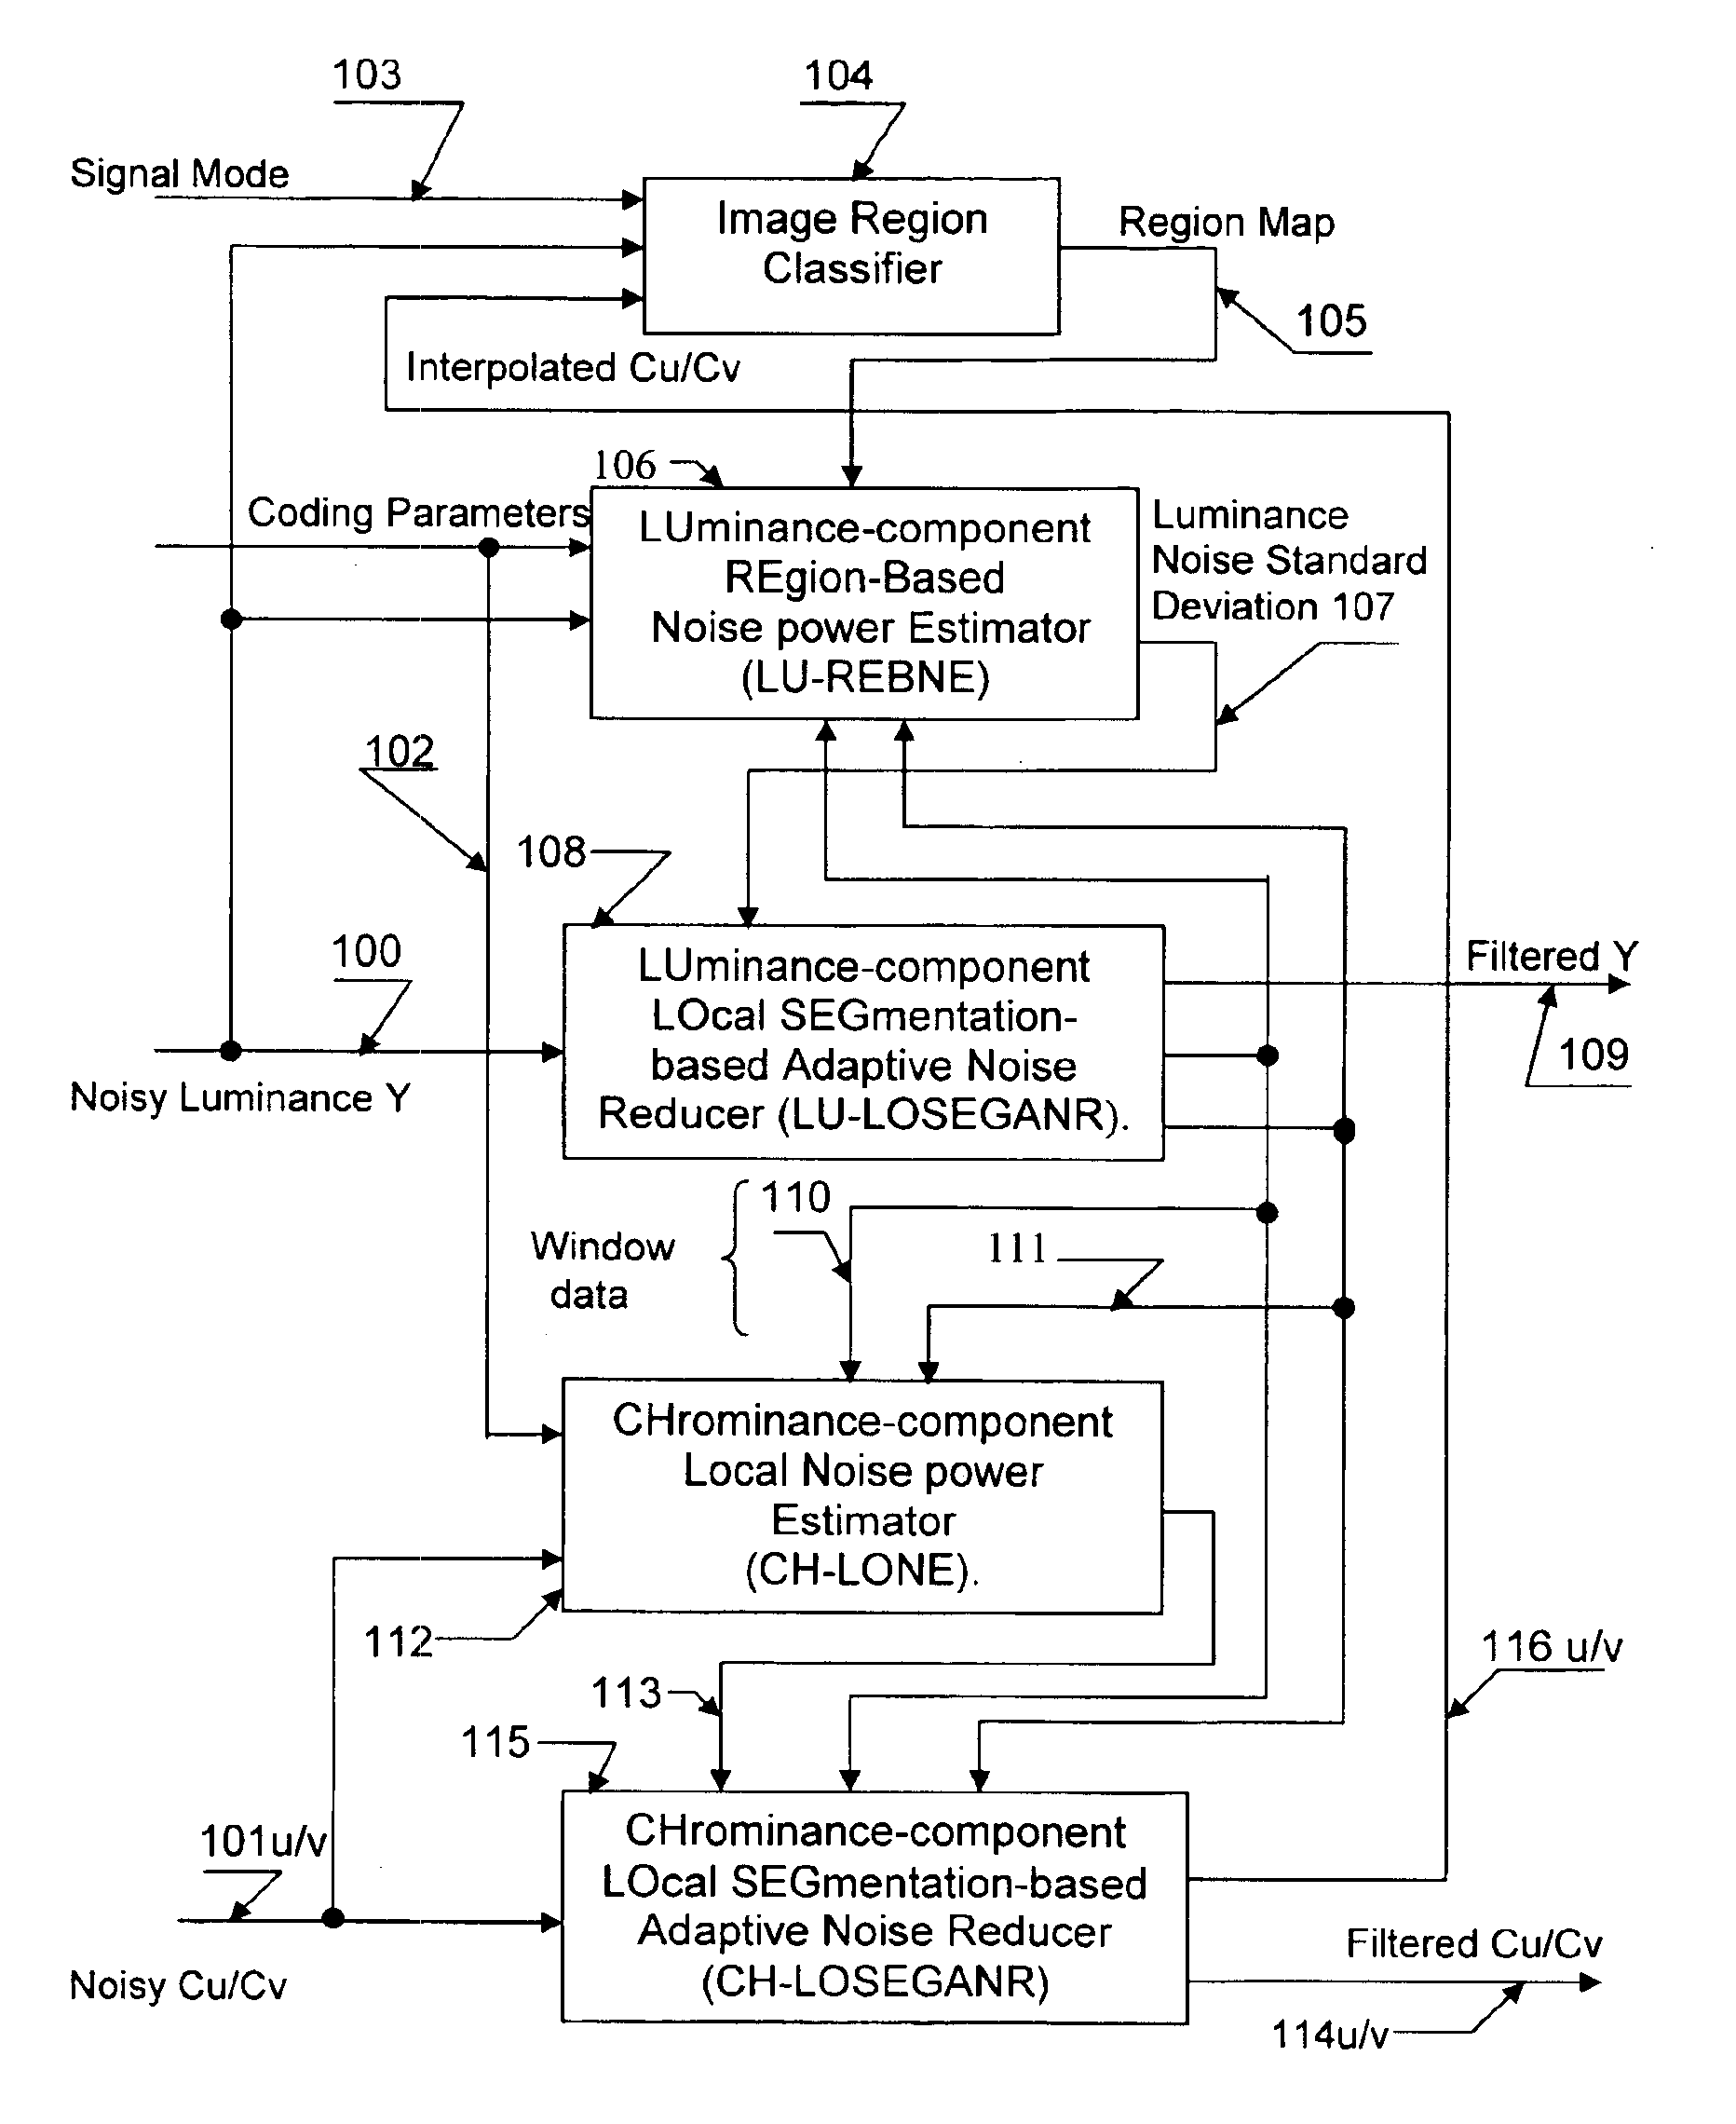 Apparatus and method for adaptive spatial segmentation-based noise reducing for encoded image signal